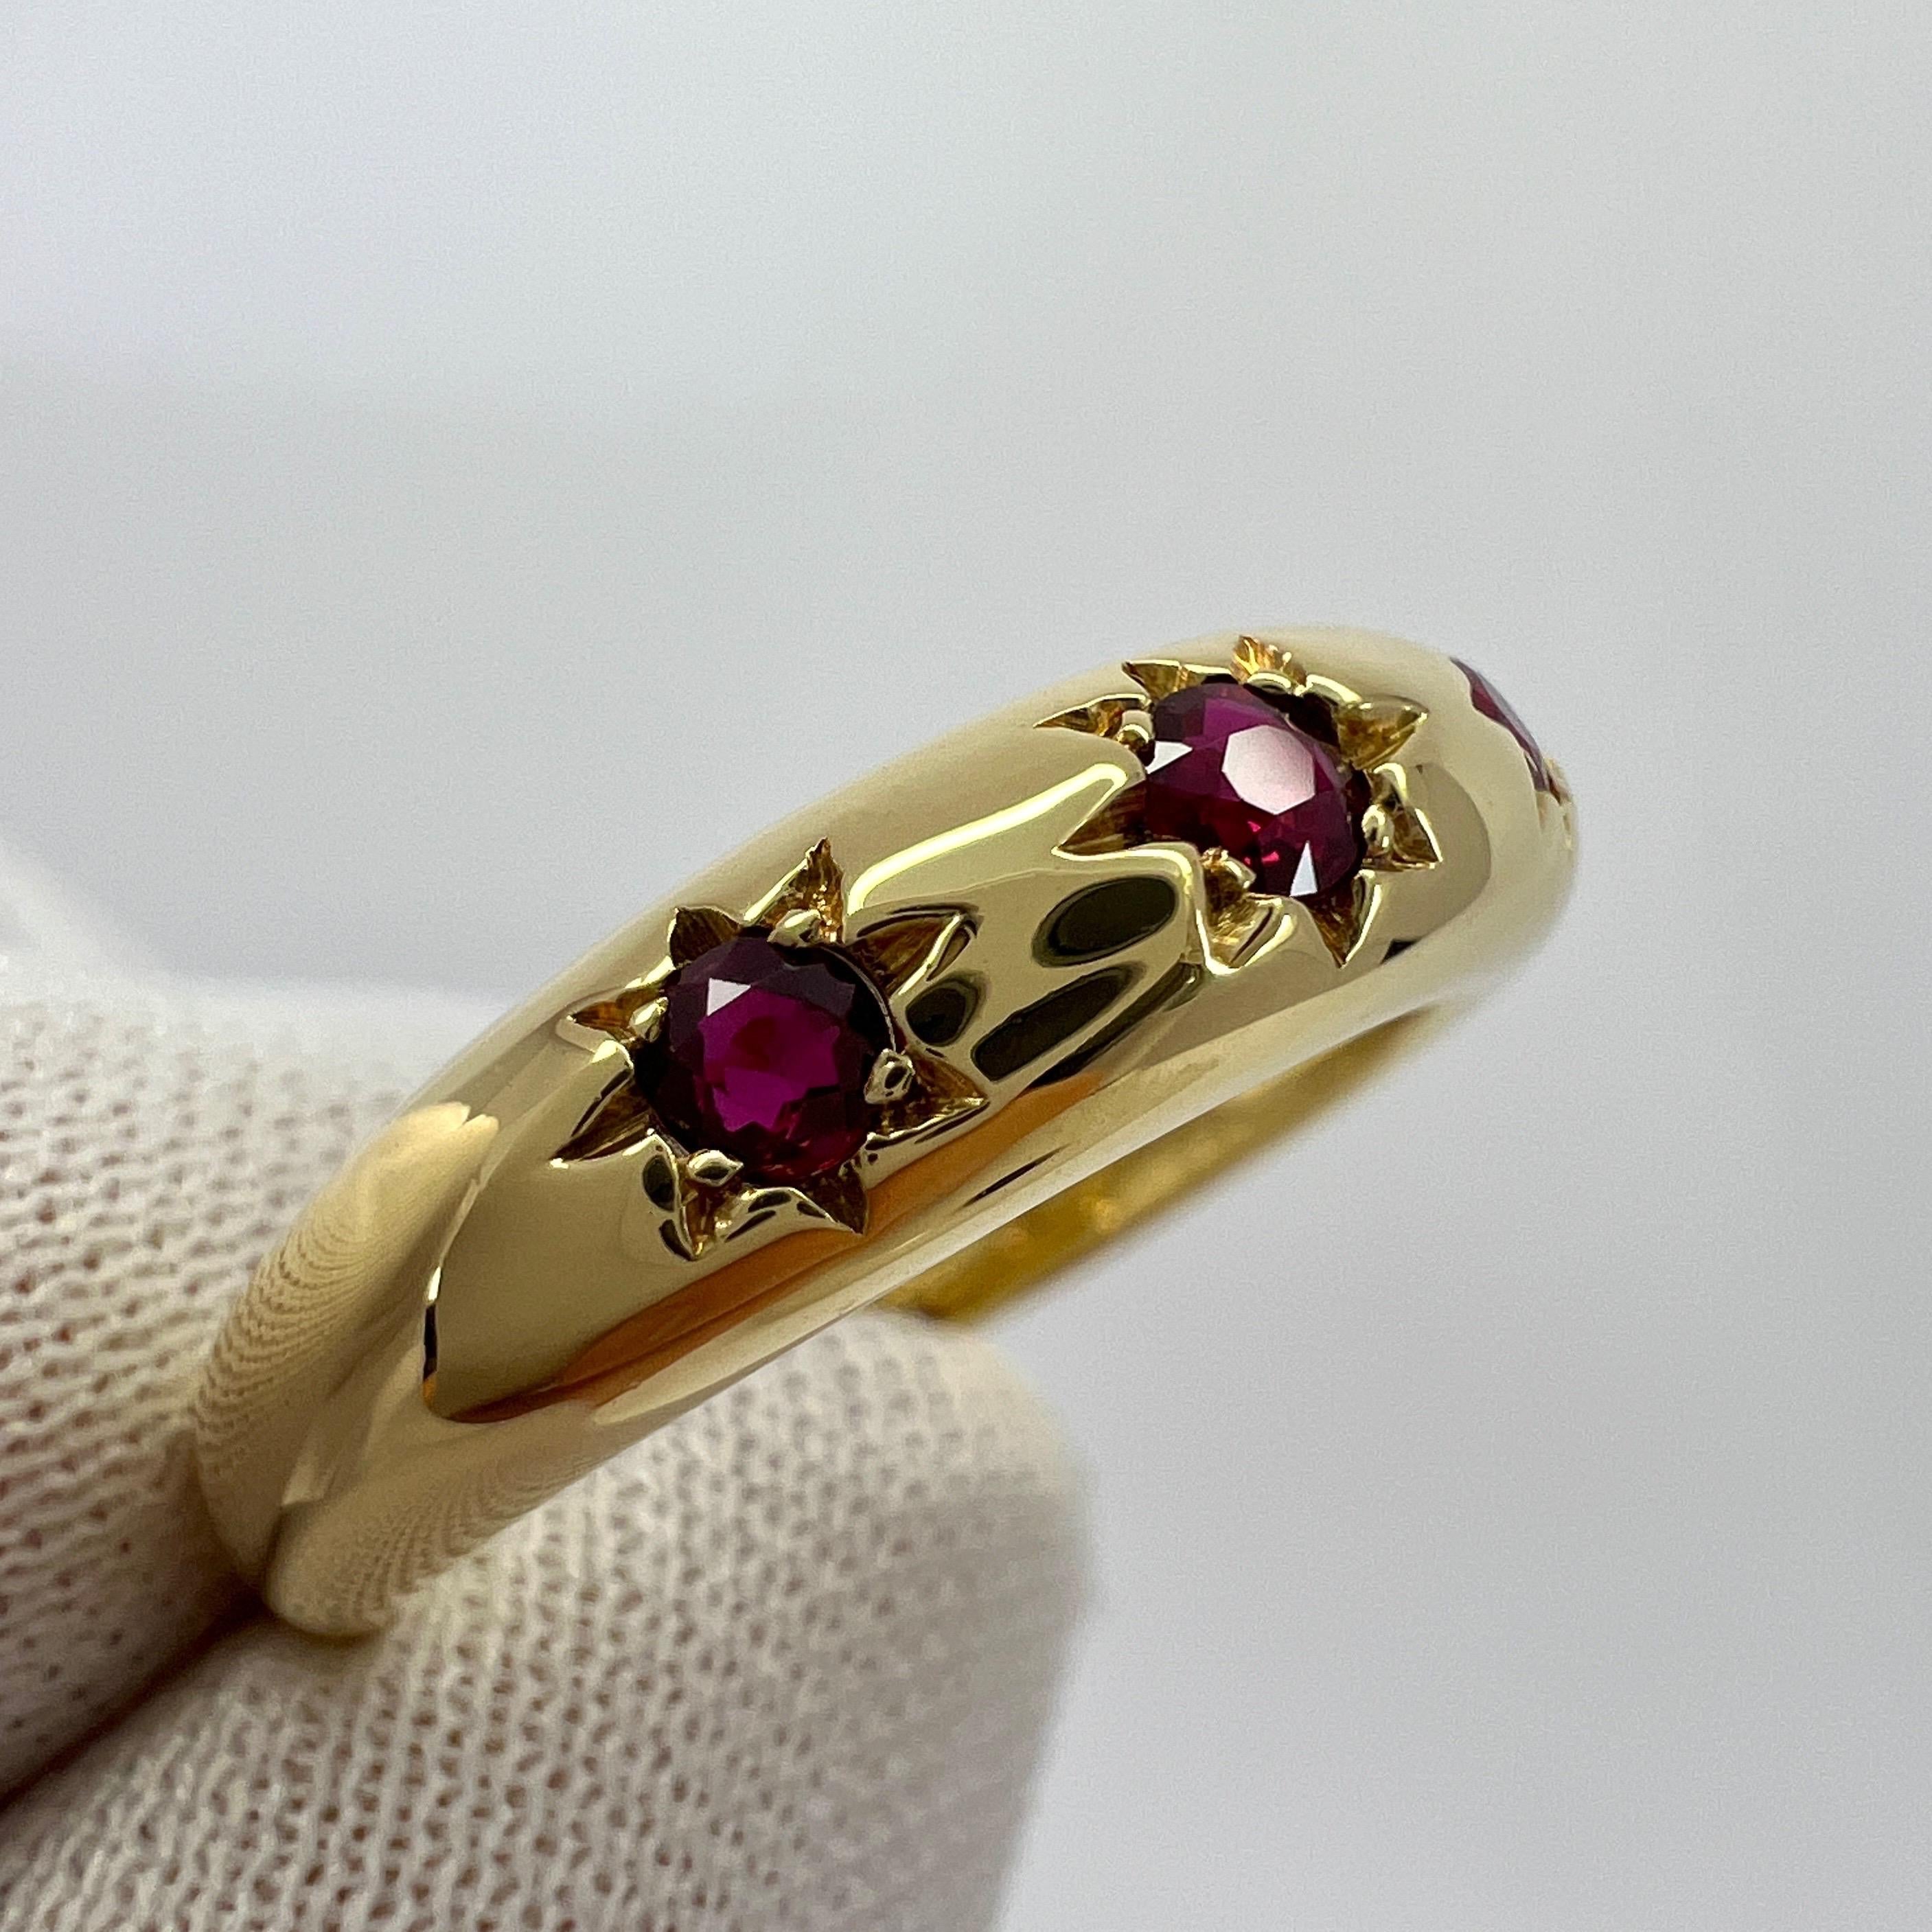 Rare Vintage Van Cleef & Arpels Star Set Ruby 18k Yellow Gold Three Stone Ring For Sale 1